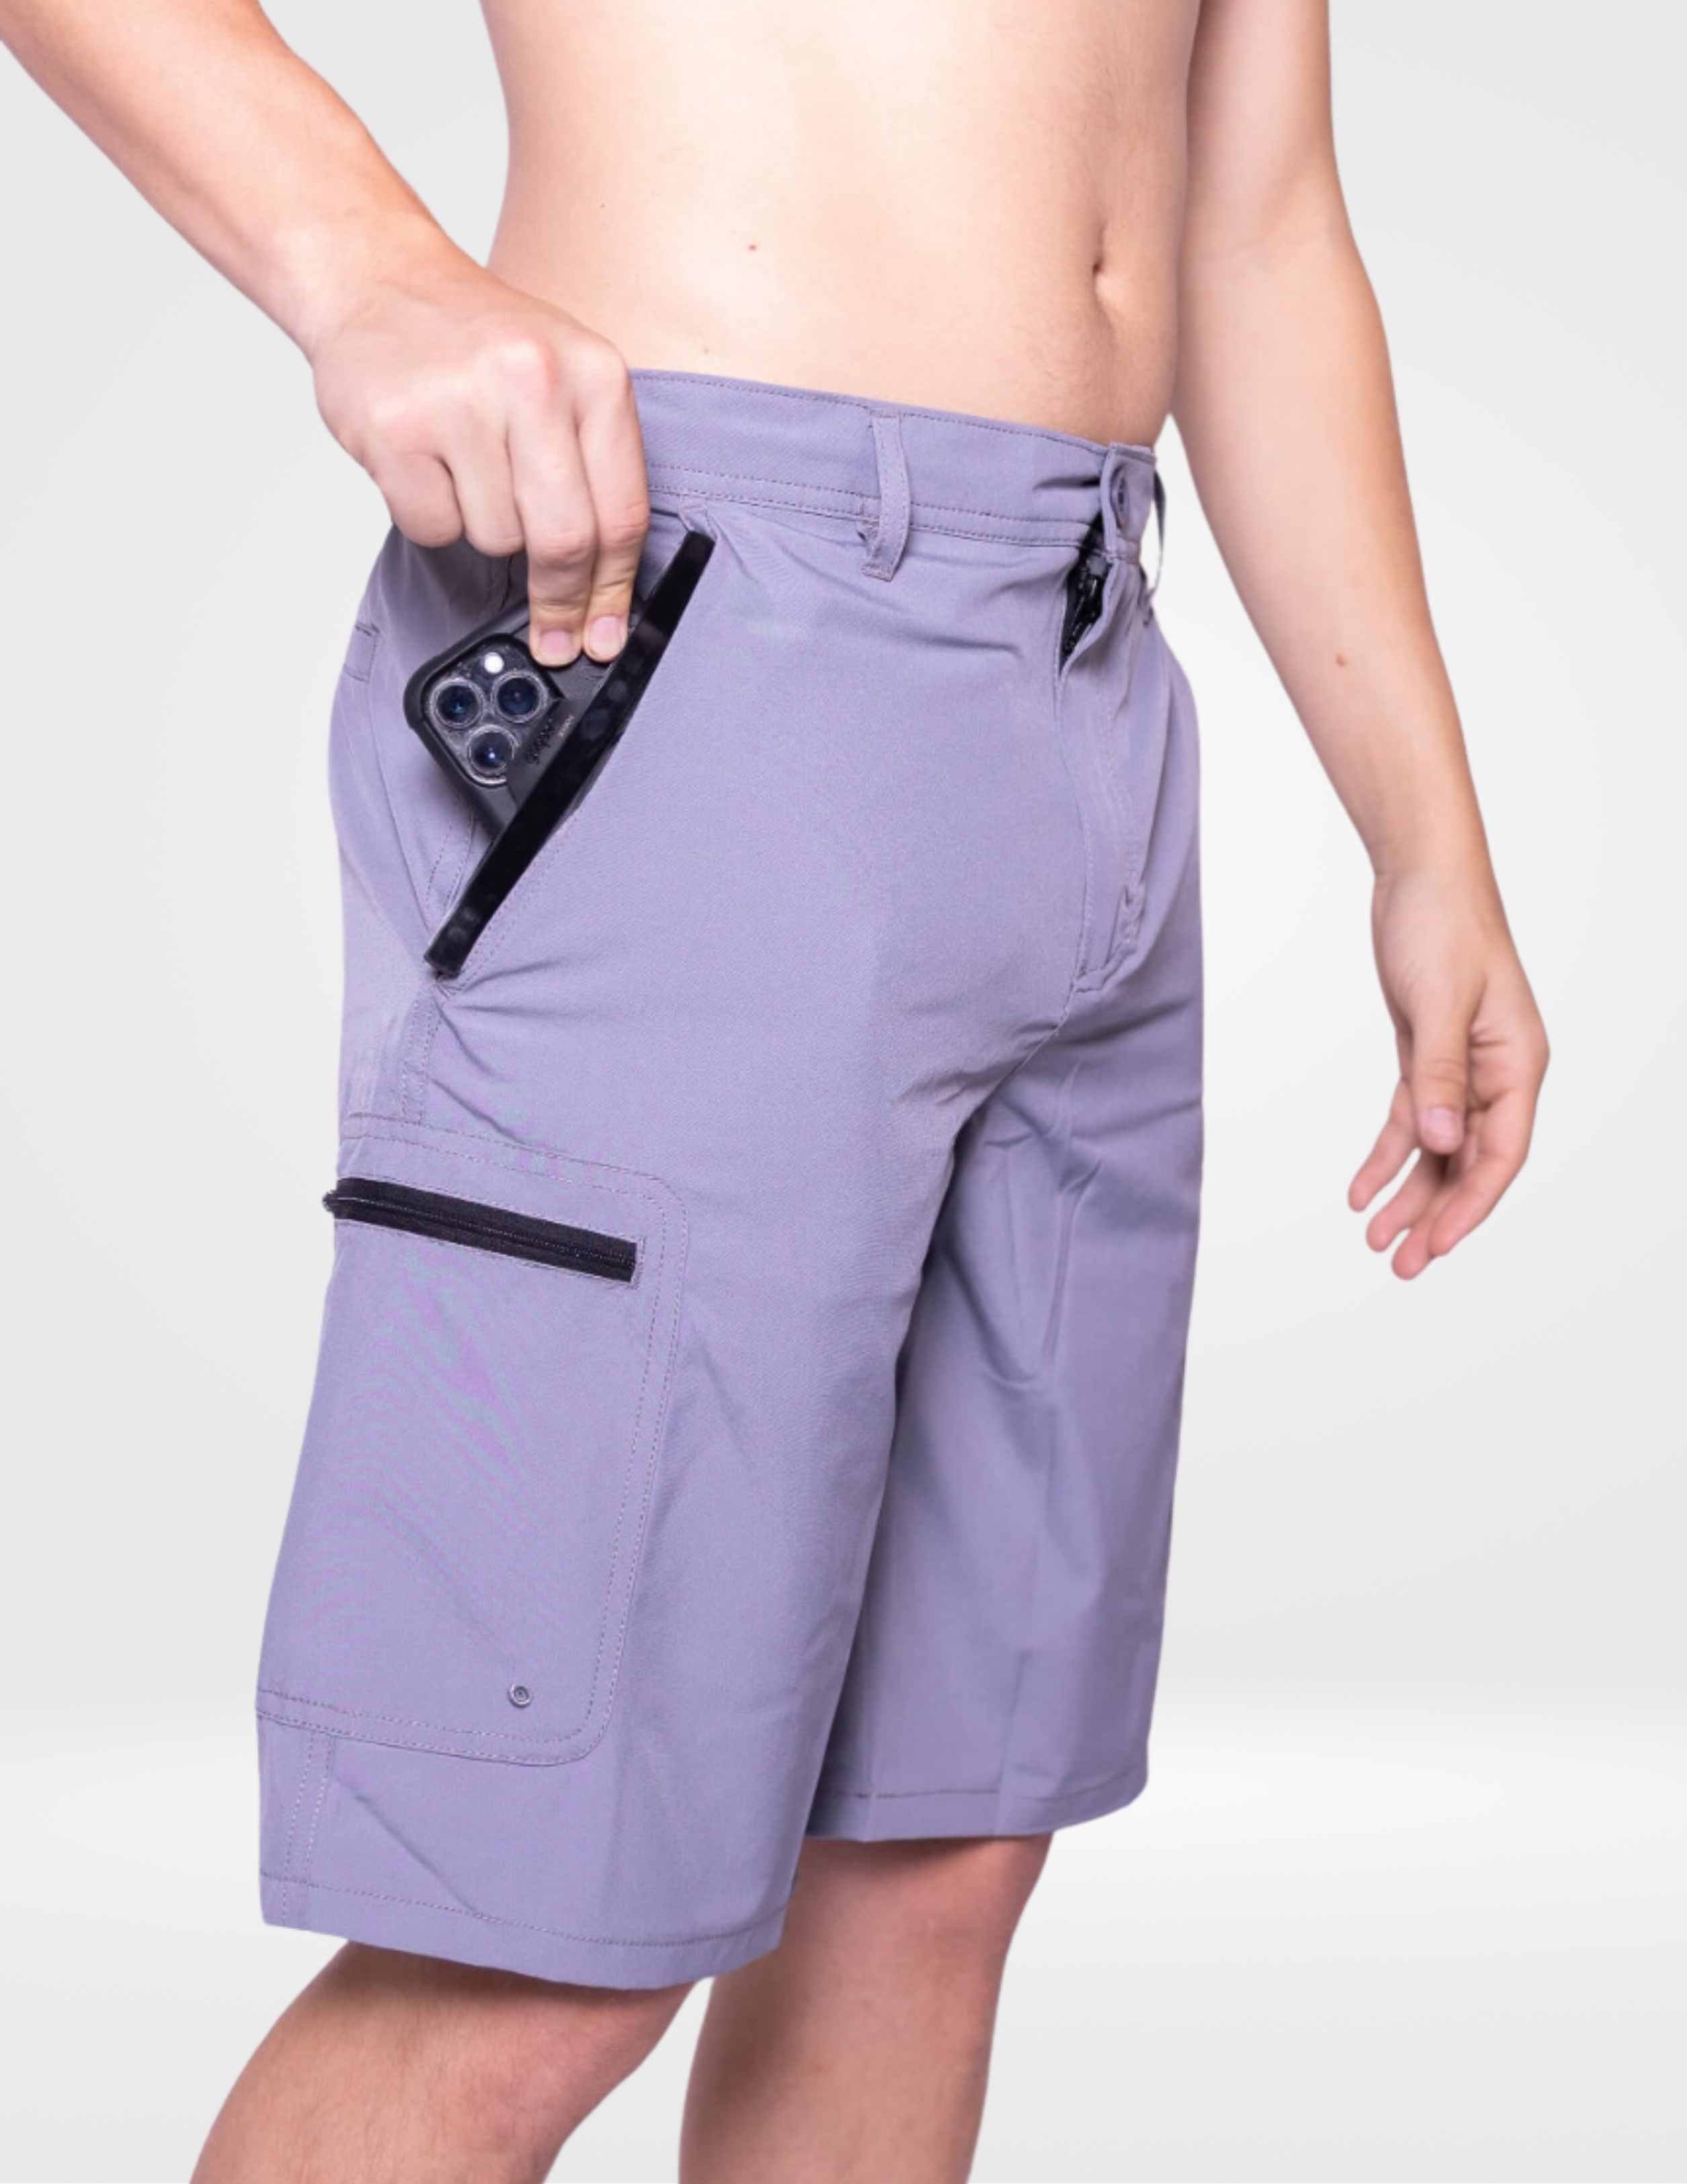 Sea Chaser Waterproof Quick Dry Shorts With A Waterproof Pocket 10 Inseam